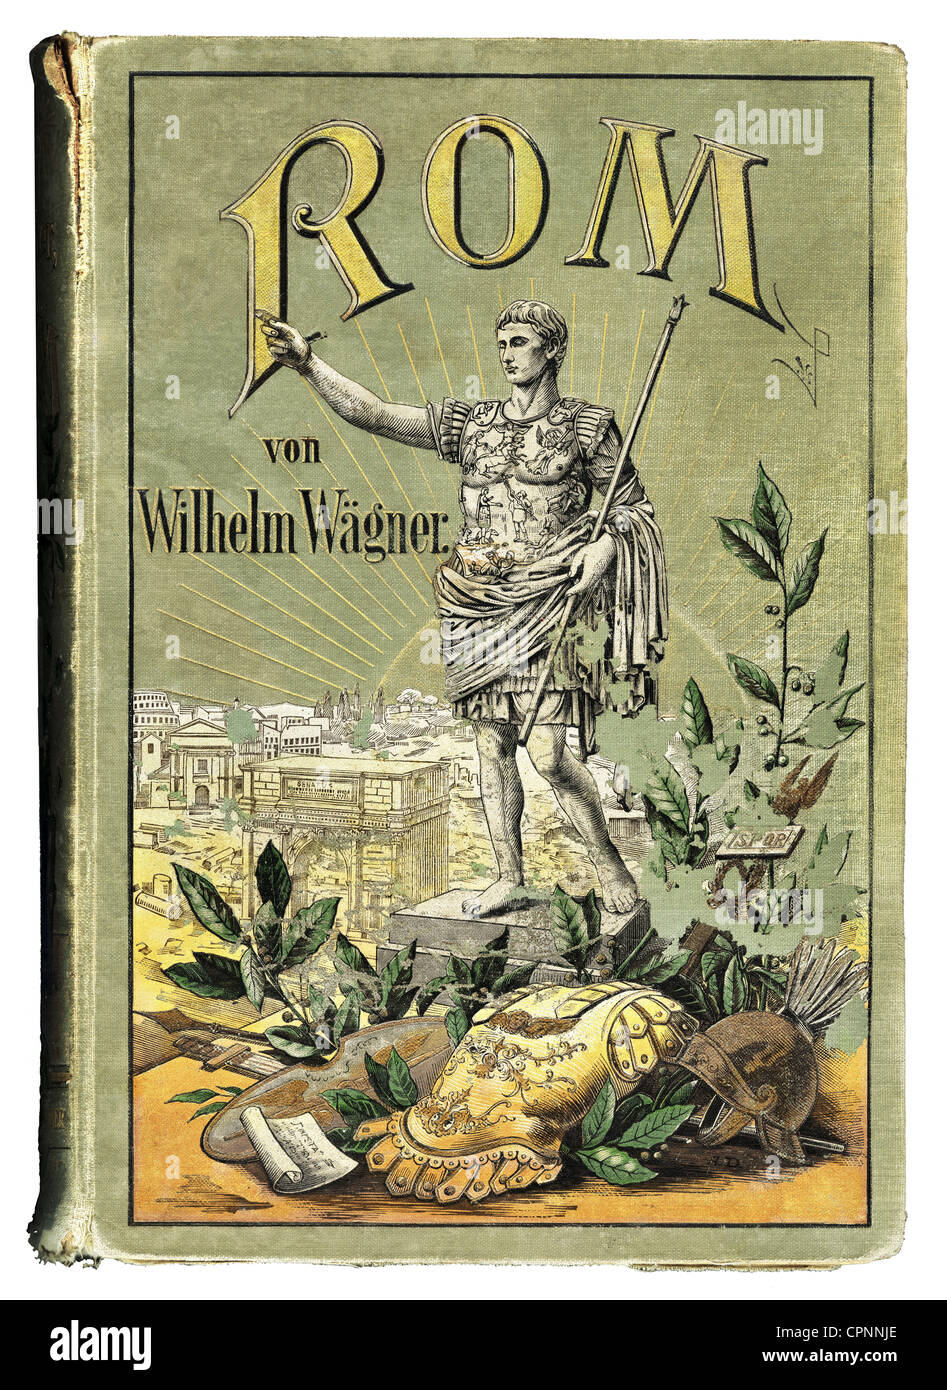 literature, history and culture of the Roman nation, by Wilhelm Waegner, Otto Spamer publishing house, Leipzig, title illustration with statue of emperor Augustus, Germany, 1899, Additional-Rights-Clearences-Not Available Stock Photo